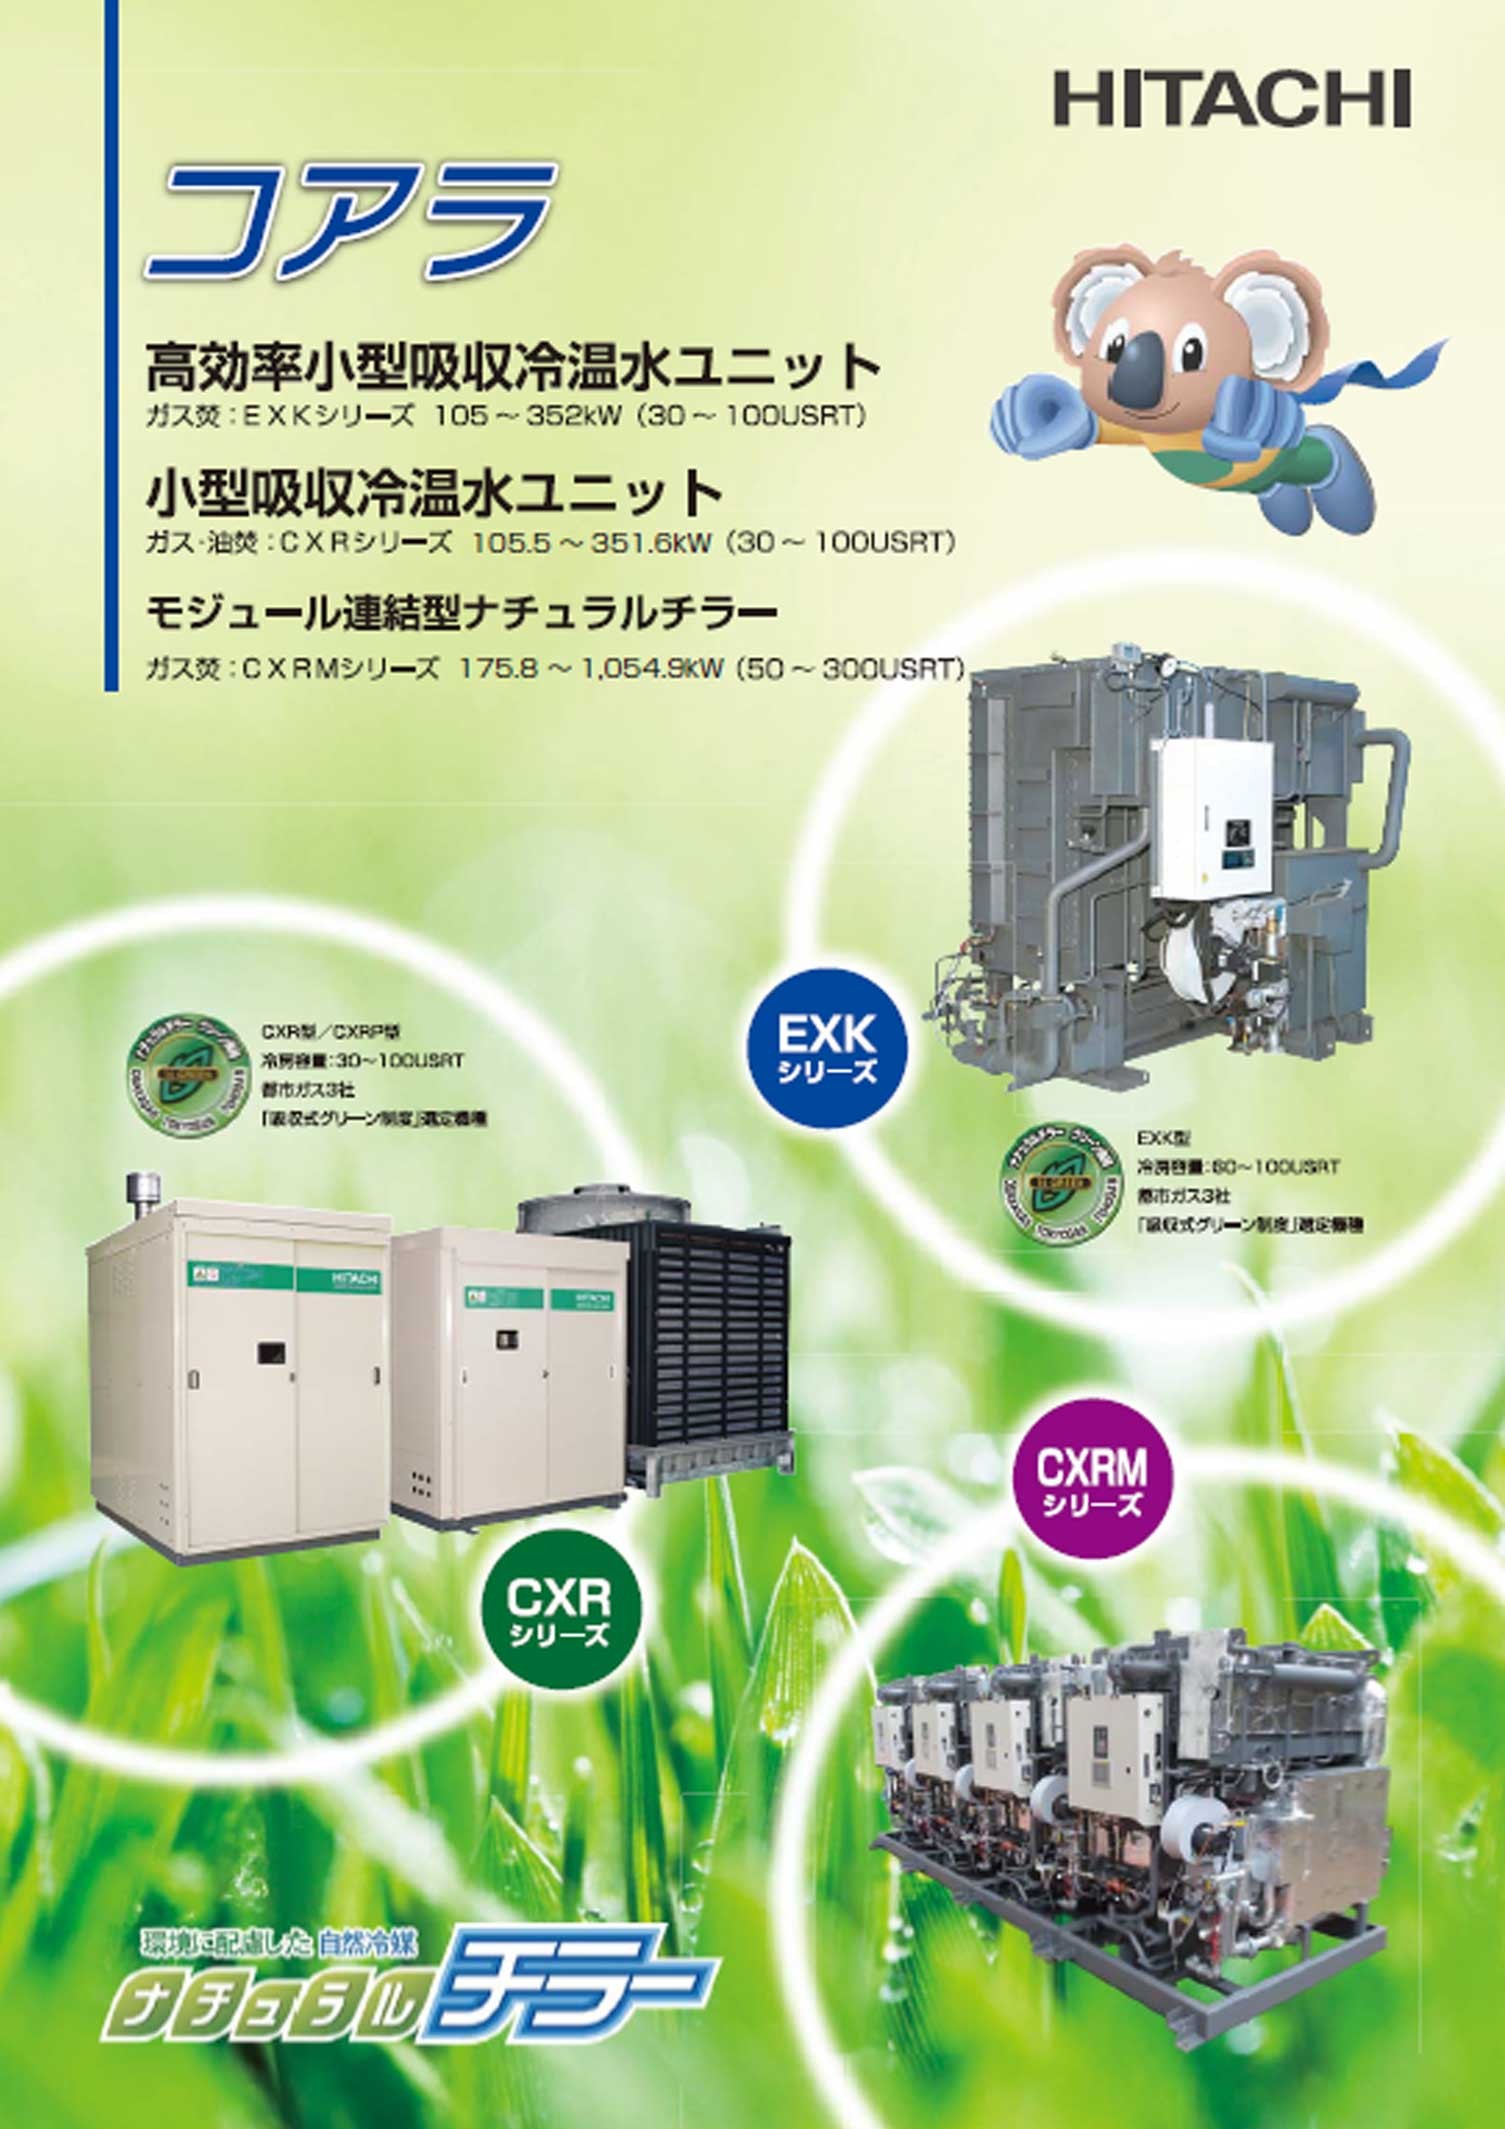 Catalog - Small-scale absorption chiller (Japanese)